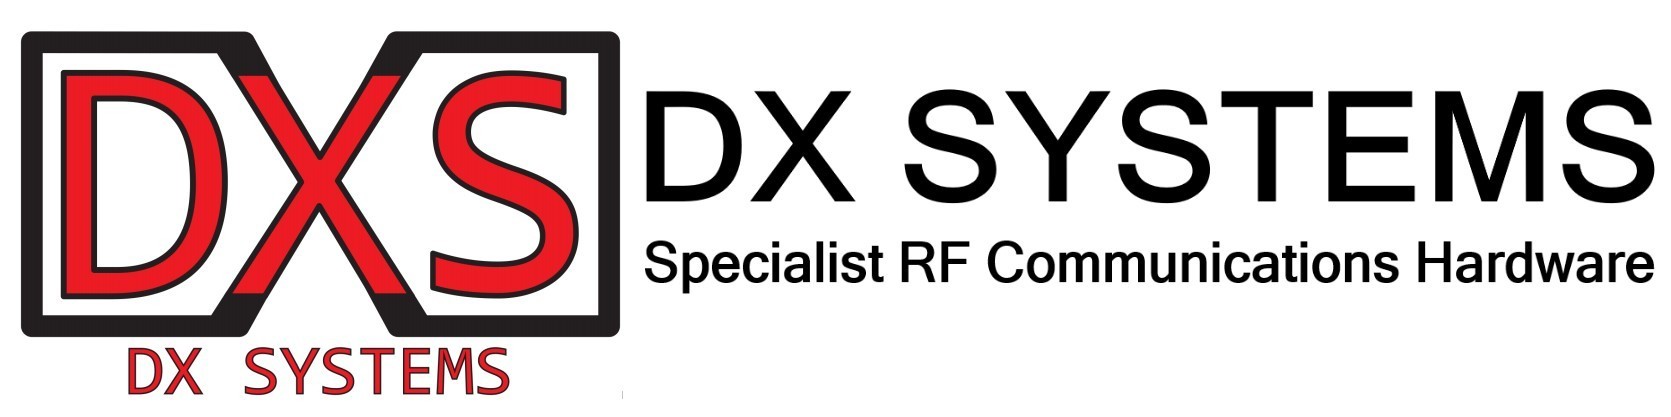 DX Systems